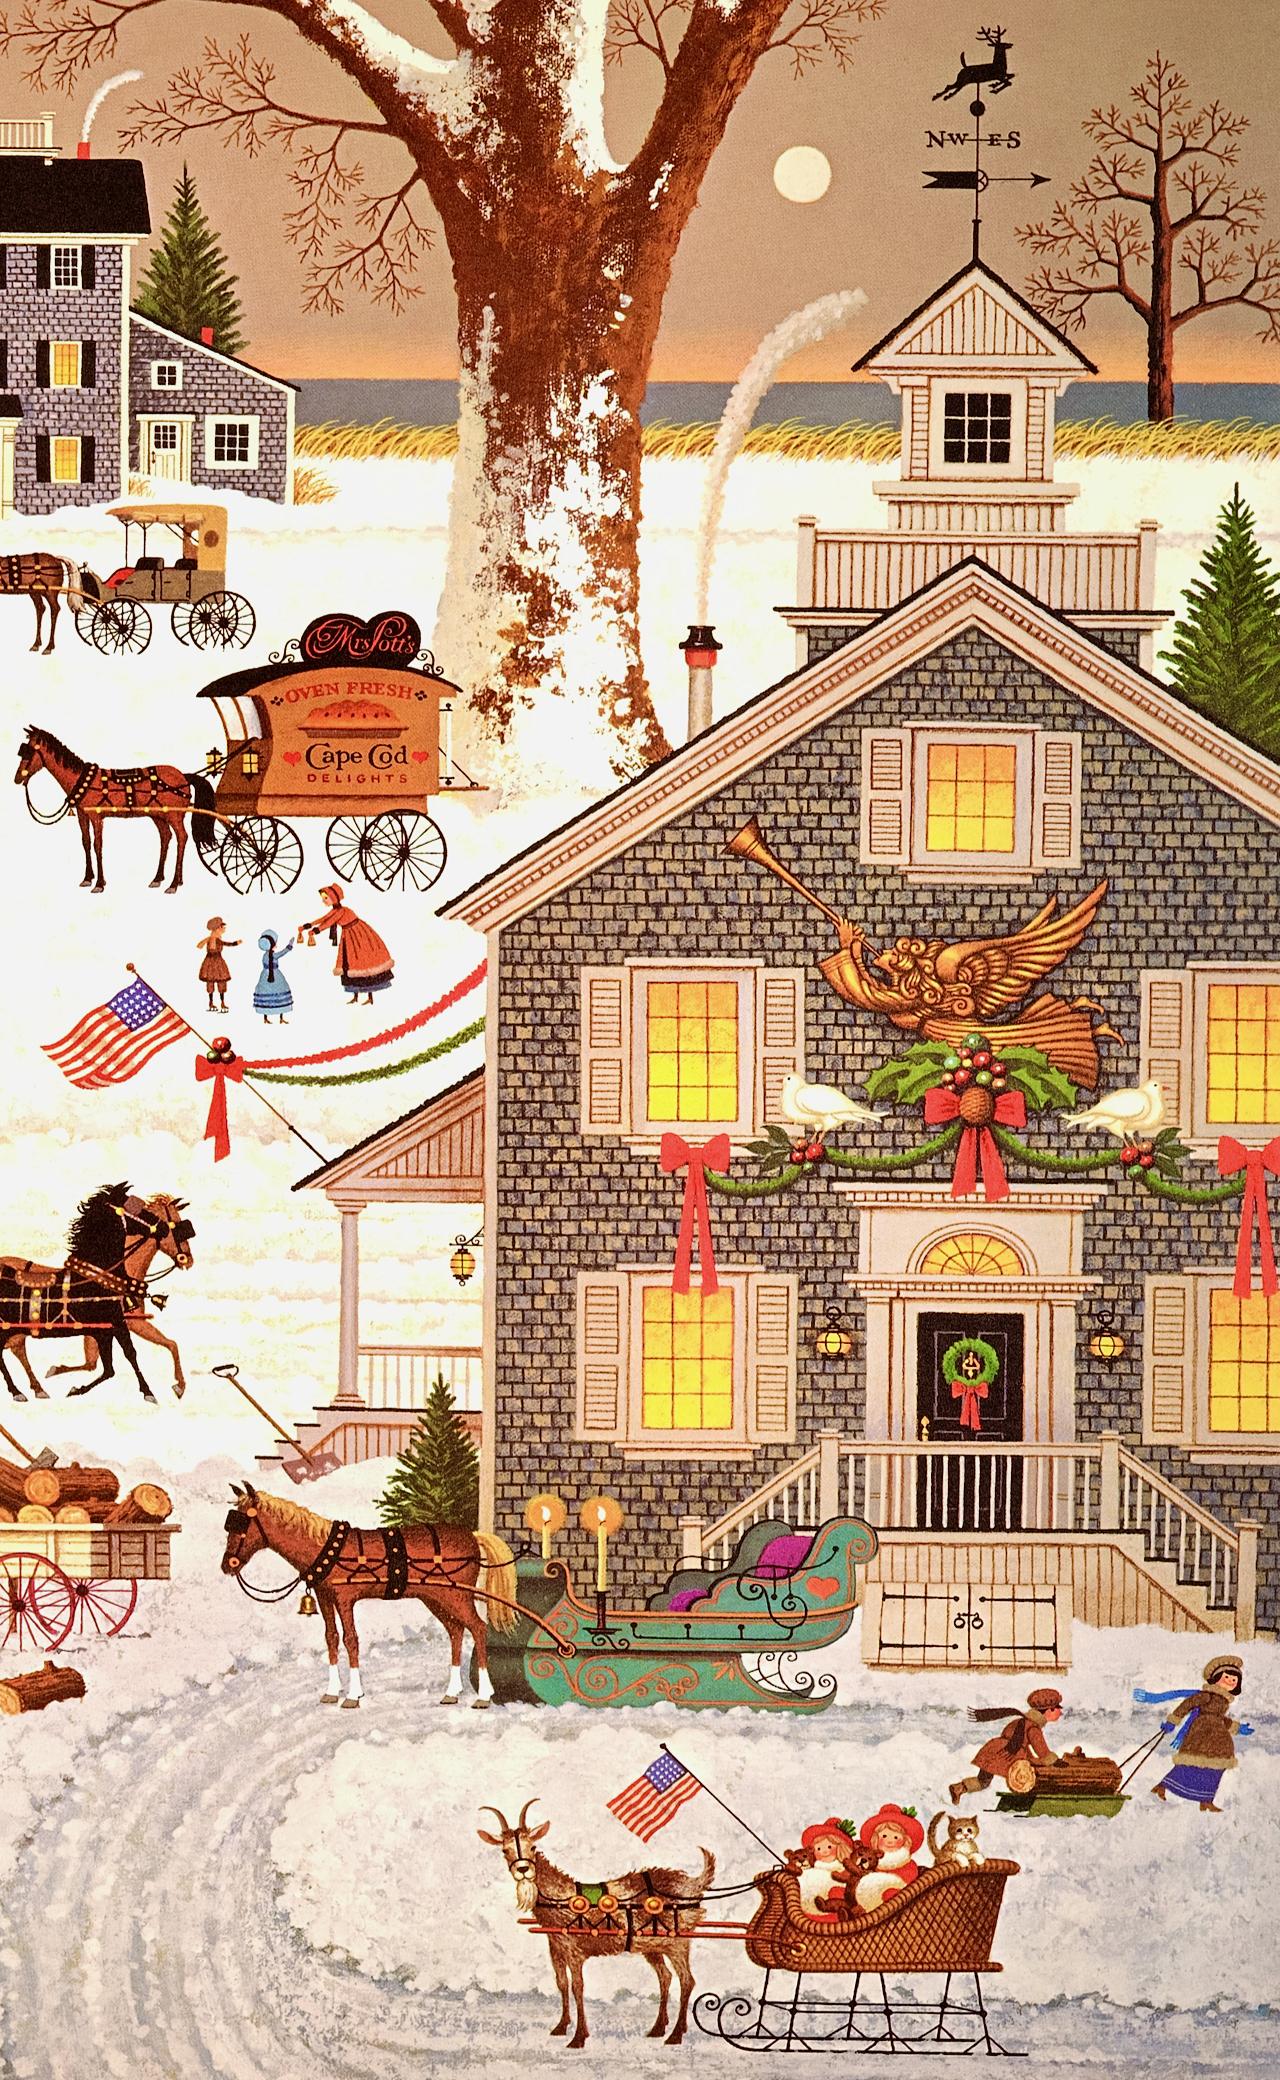 This is a limited edition colored lithograph entitled Cape Cod Christmas, 1982 by Charles Wyscocki, published by the Greenwich Workshop in Trumbull, Connecticut. The print is hand signed and numbered by the artist in the lower left, 1016/2000. The